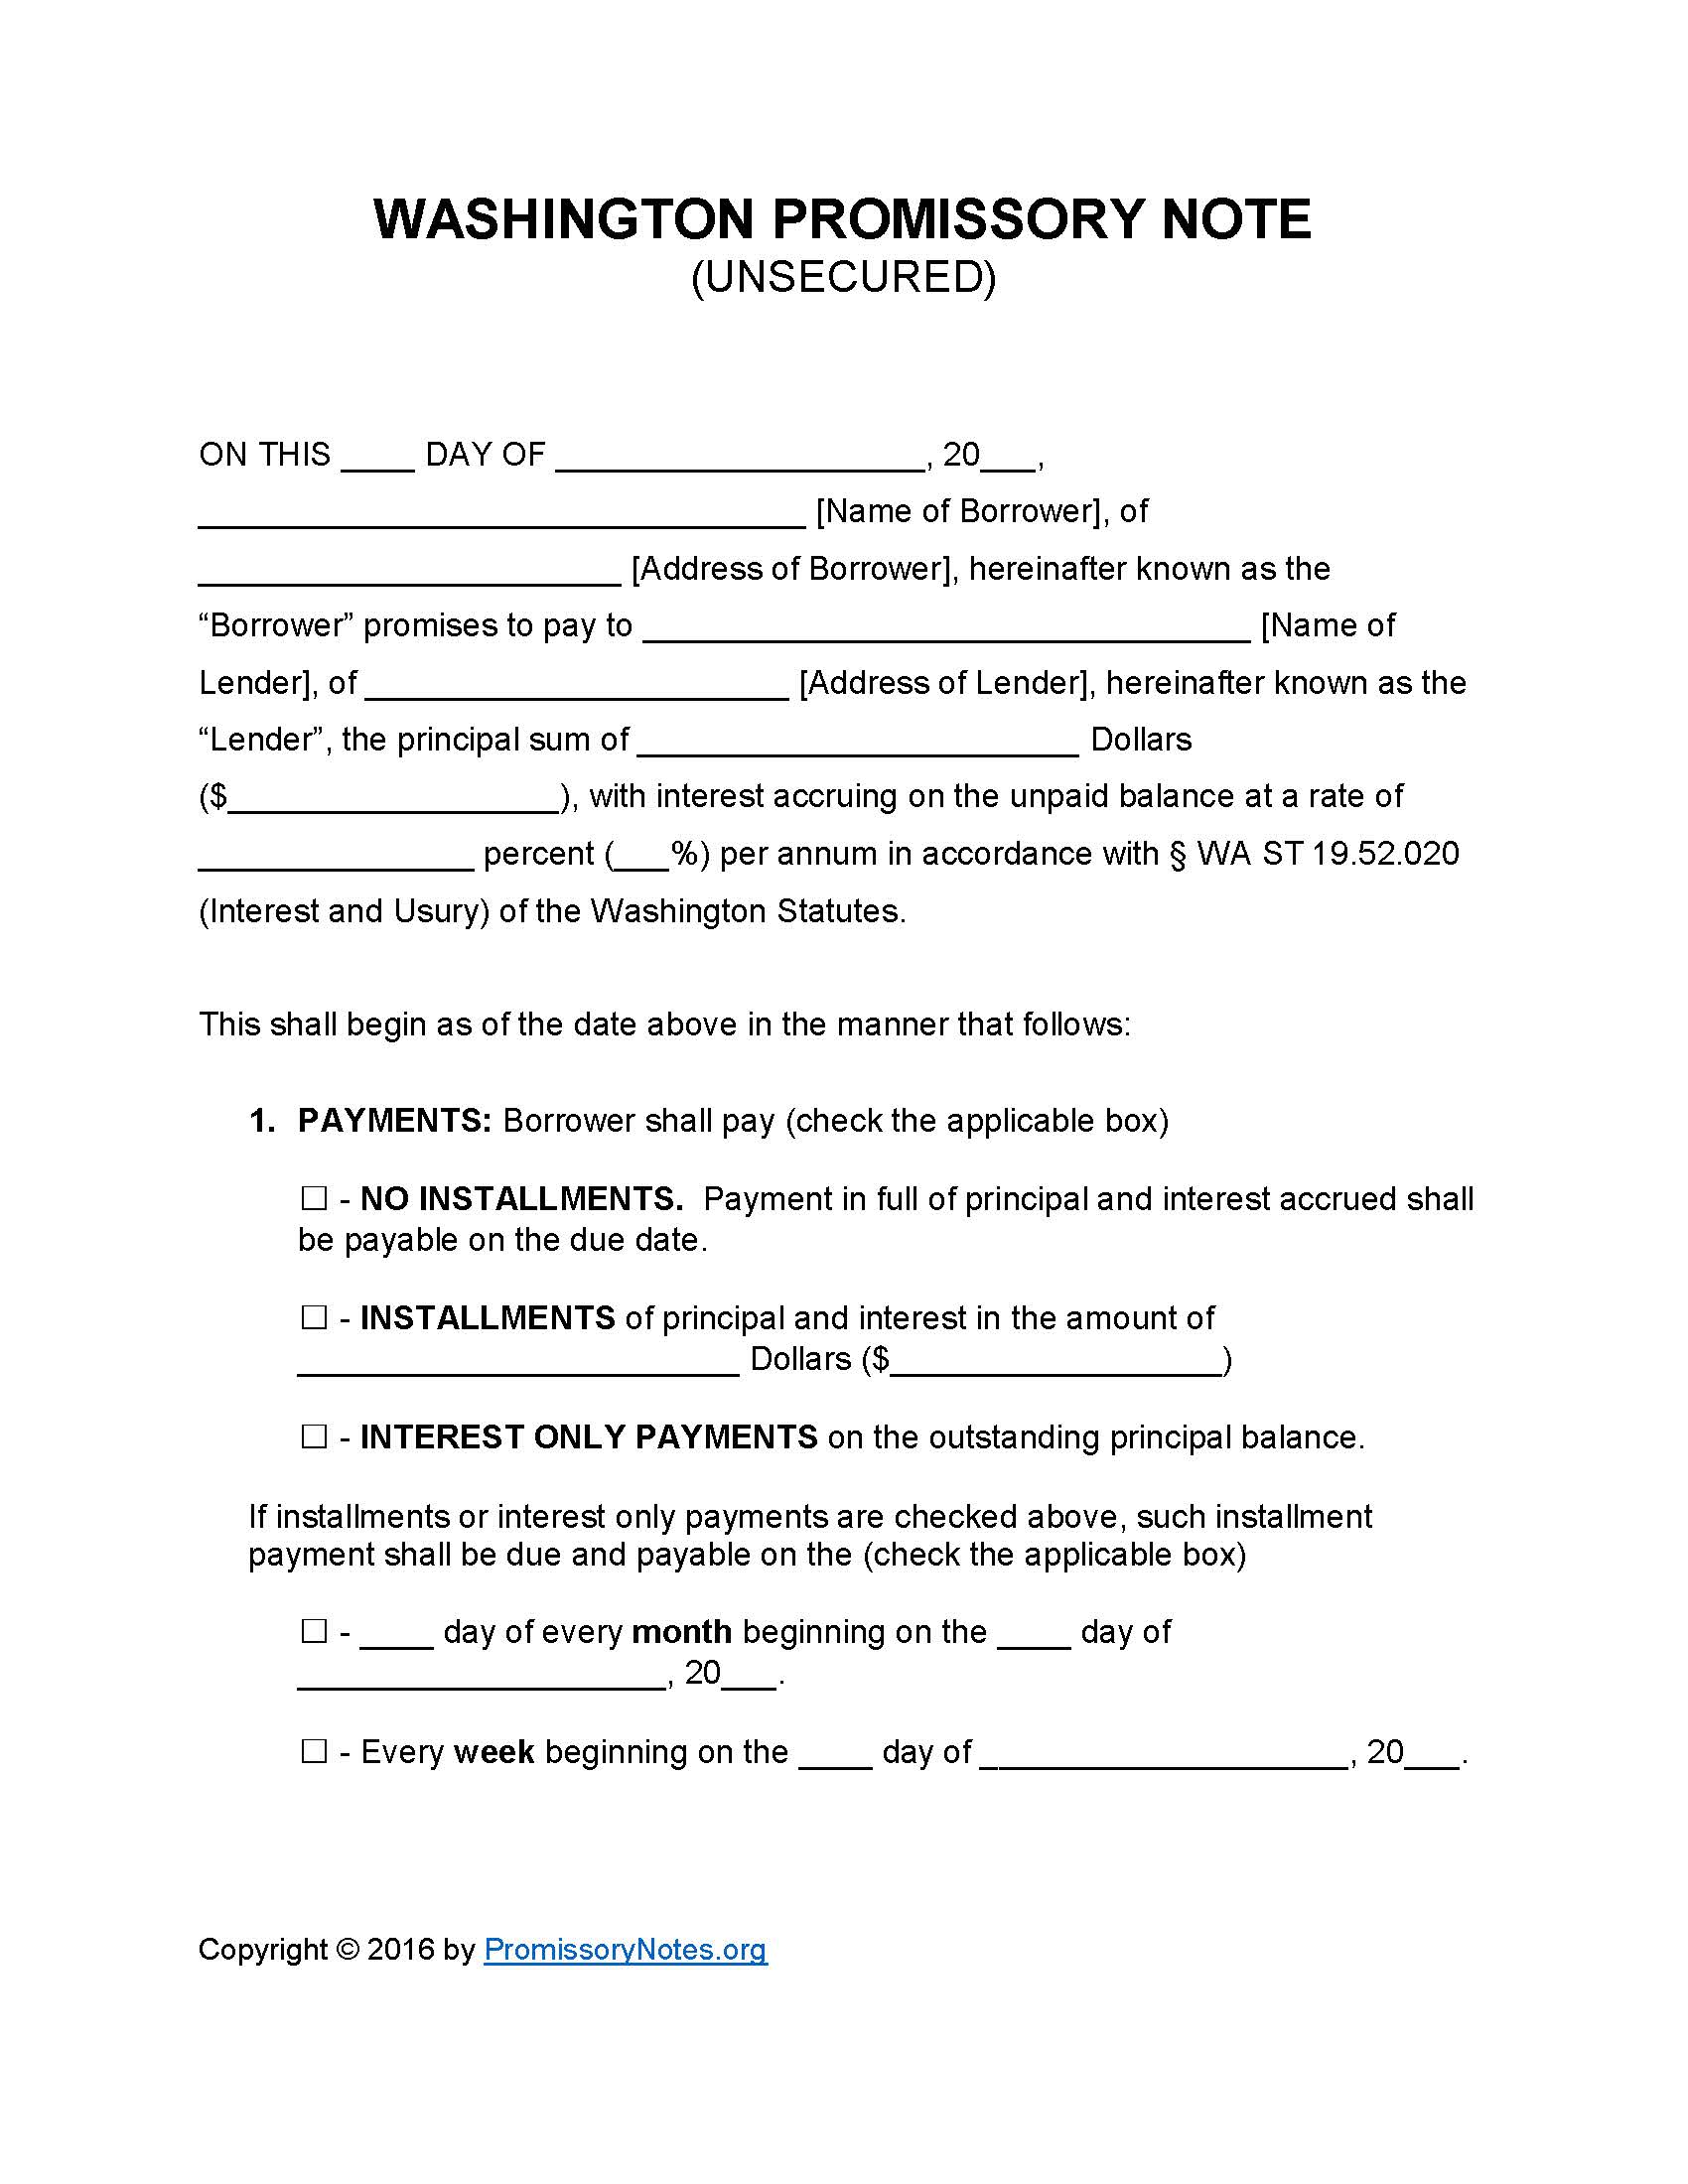 Washington Unsecured Promissory Note Template Promissory Notes Promissory Notes